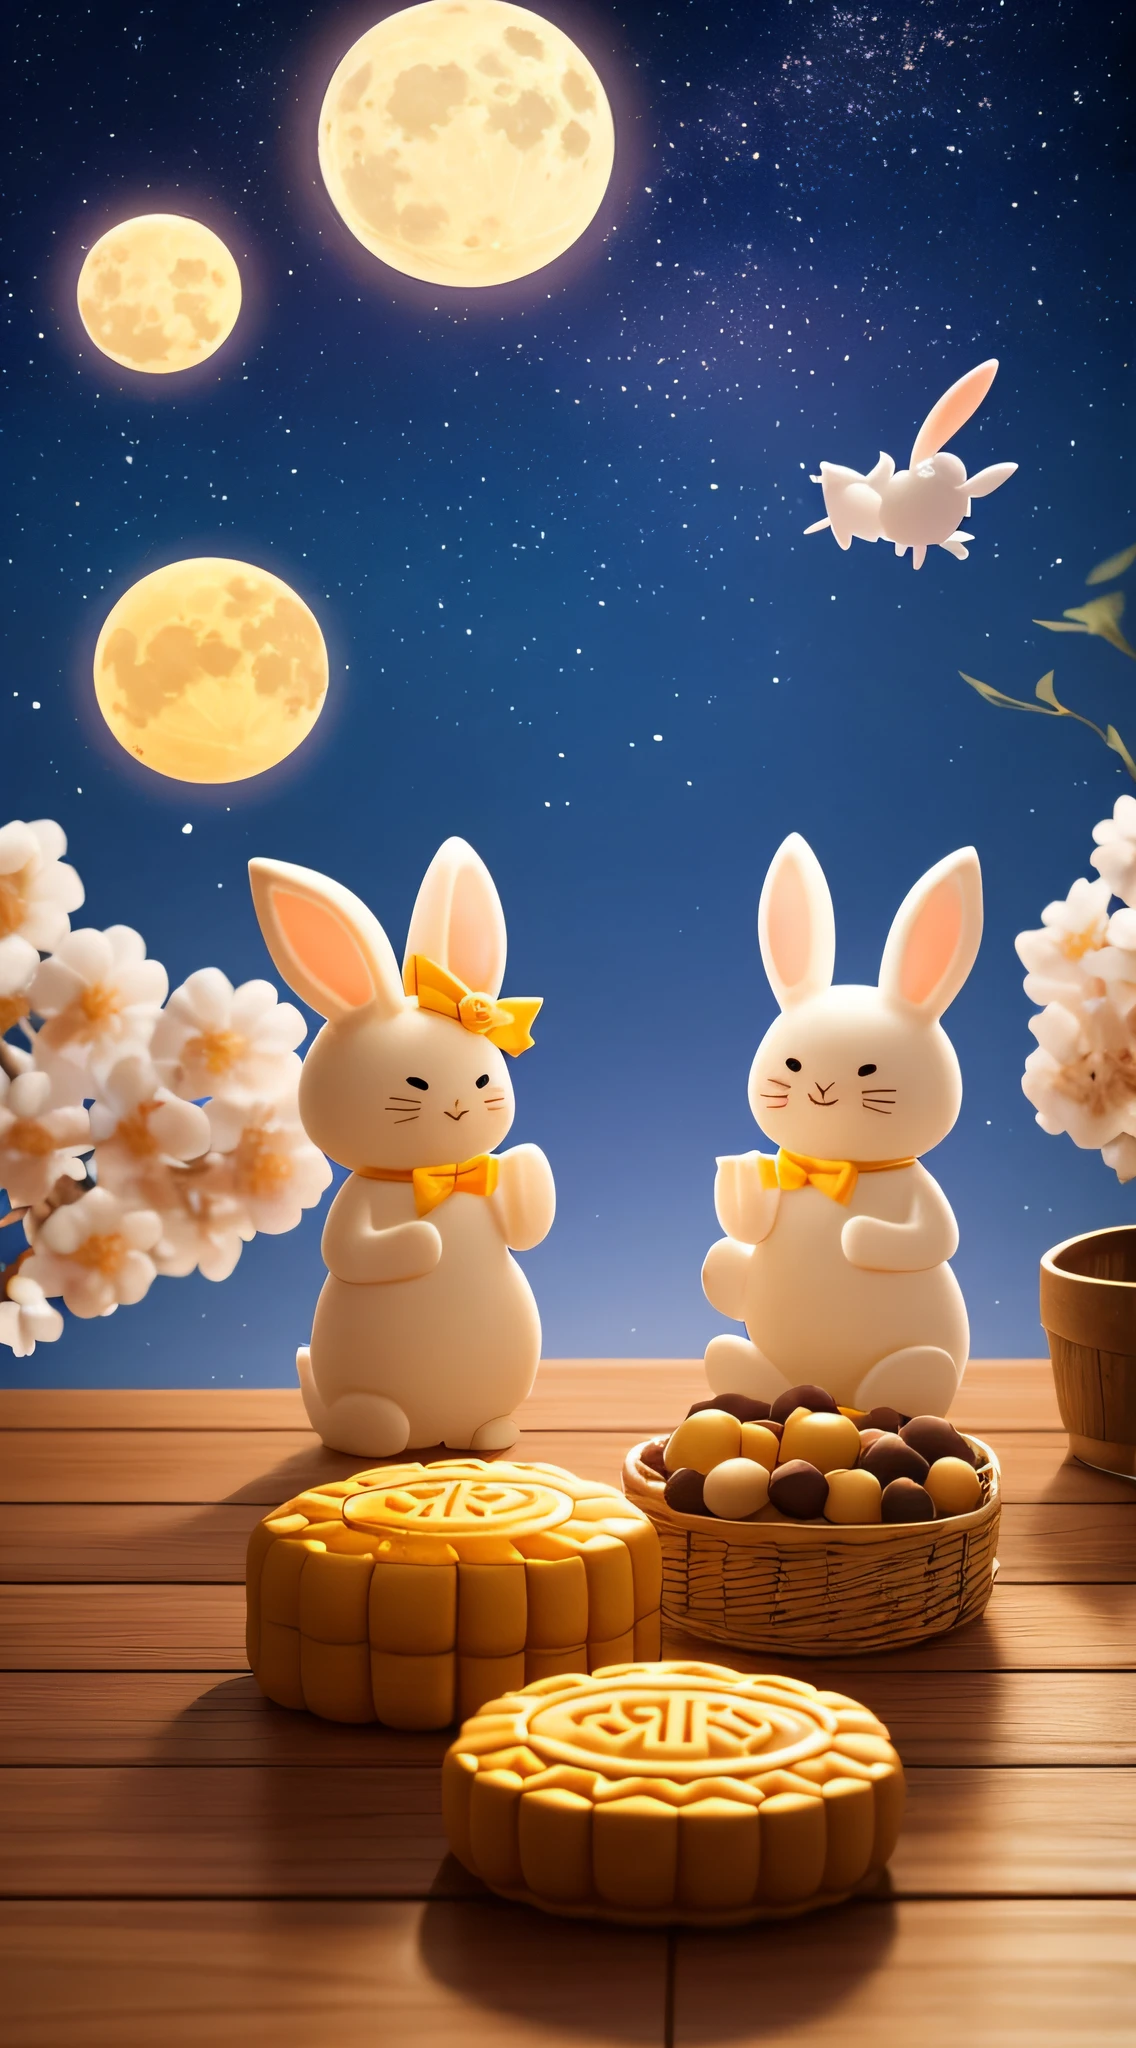 Mid-Autumn Festival,there's a bright moon in the sky,mooncake (esp. for the Mid-Autumn Festival),Two cute rabbits eating mooncakes,sweet osmanthus,Warm color, firefly, warm light,c4d,oc rendering,3D rendering ,medium shot, Full details,realistic details,high resolution